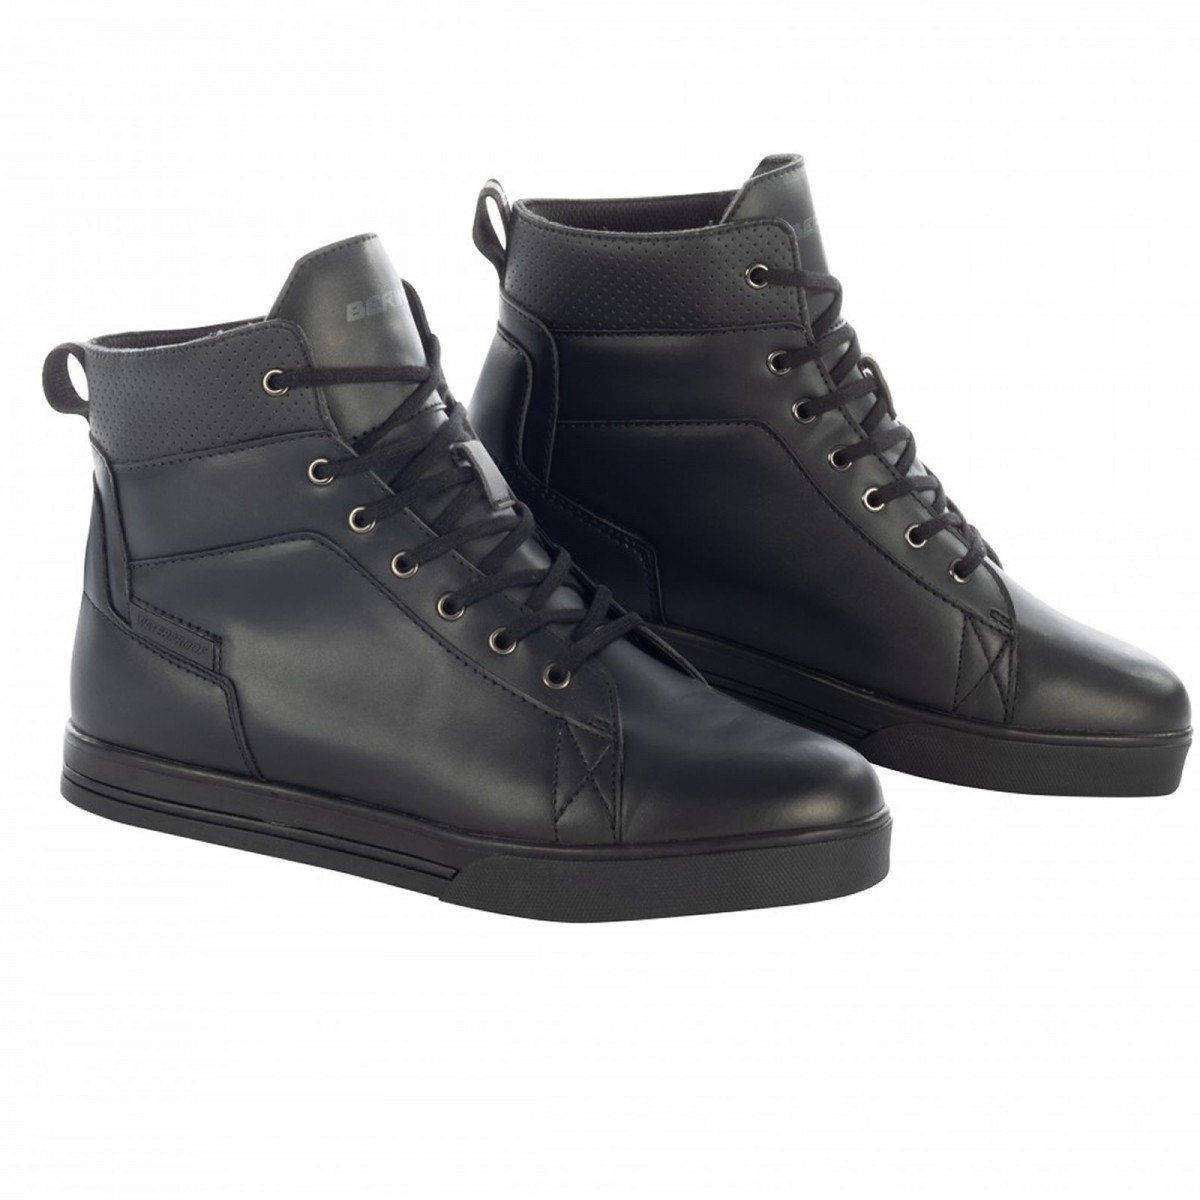 Image of EU Bering Indy Noir Chaussures Taille 40